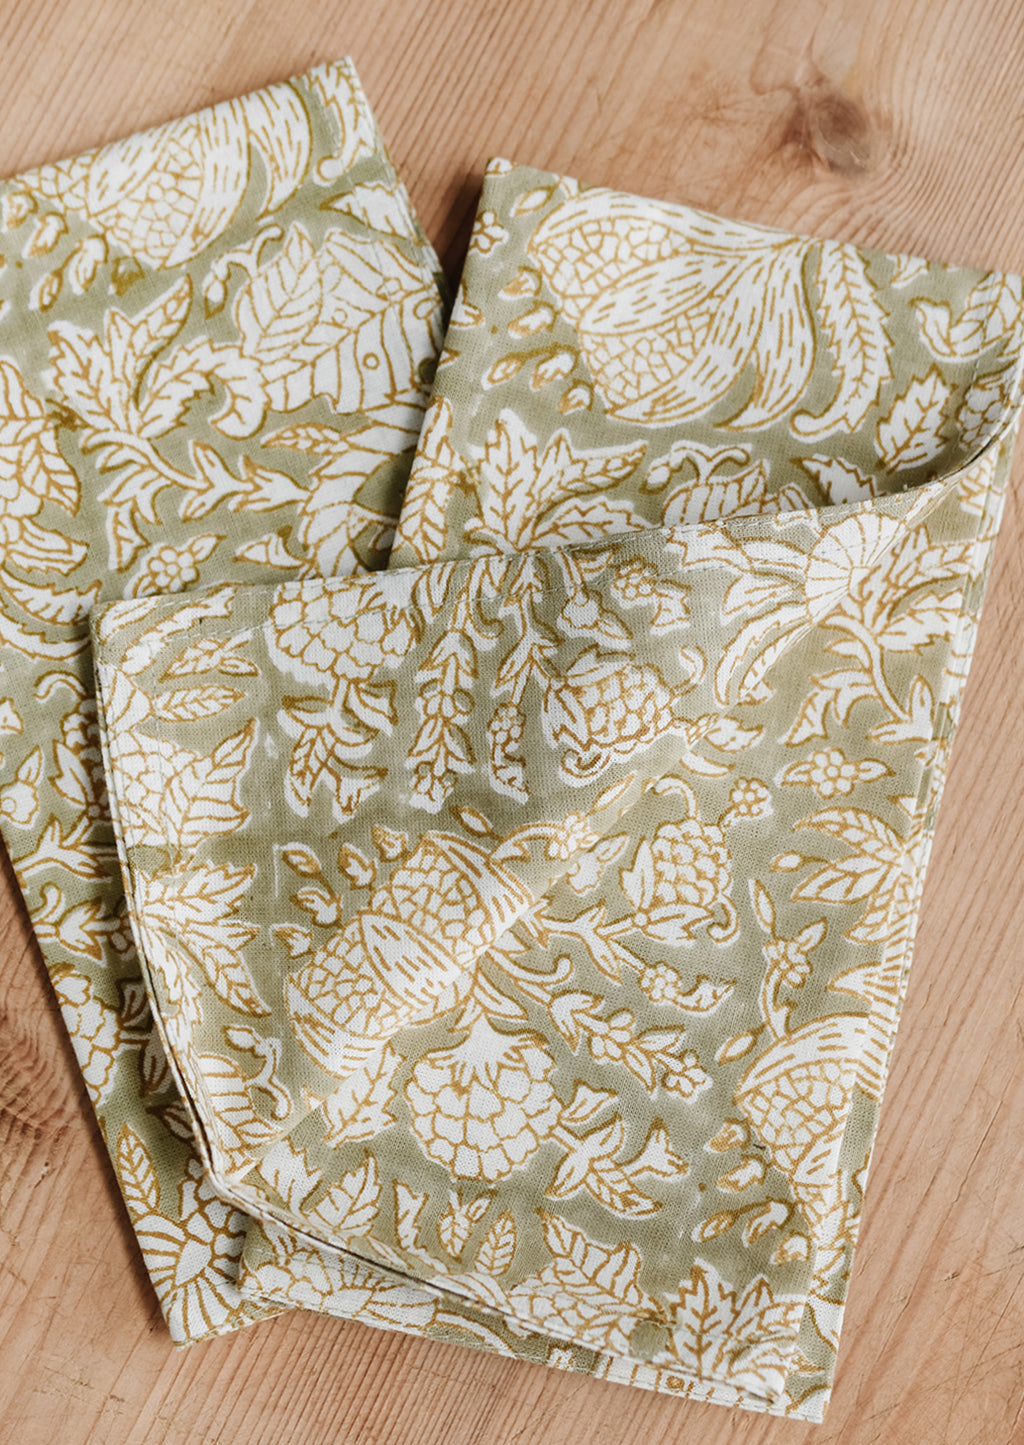 Dried Sage Multi: A pair of block print napkins in sage green with floral print.